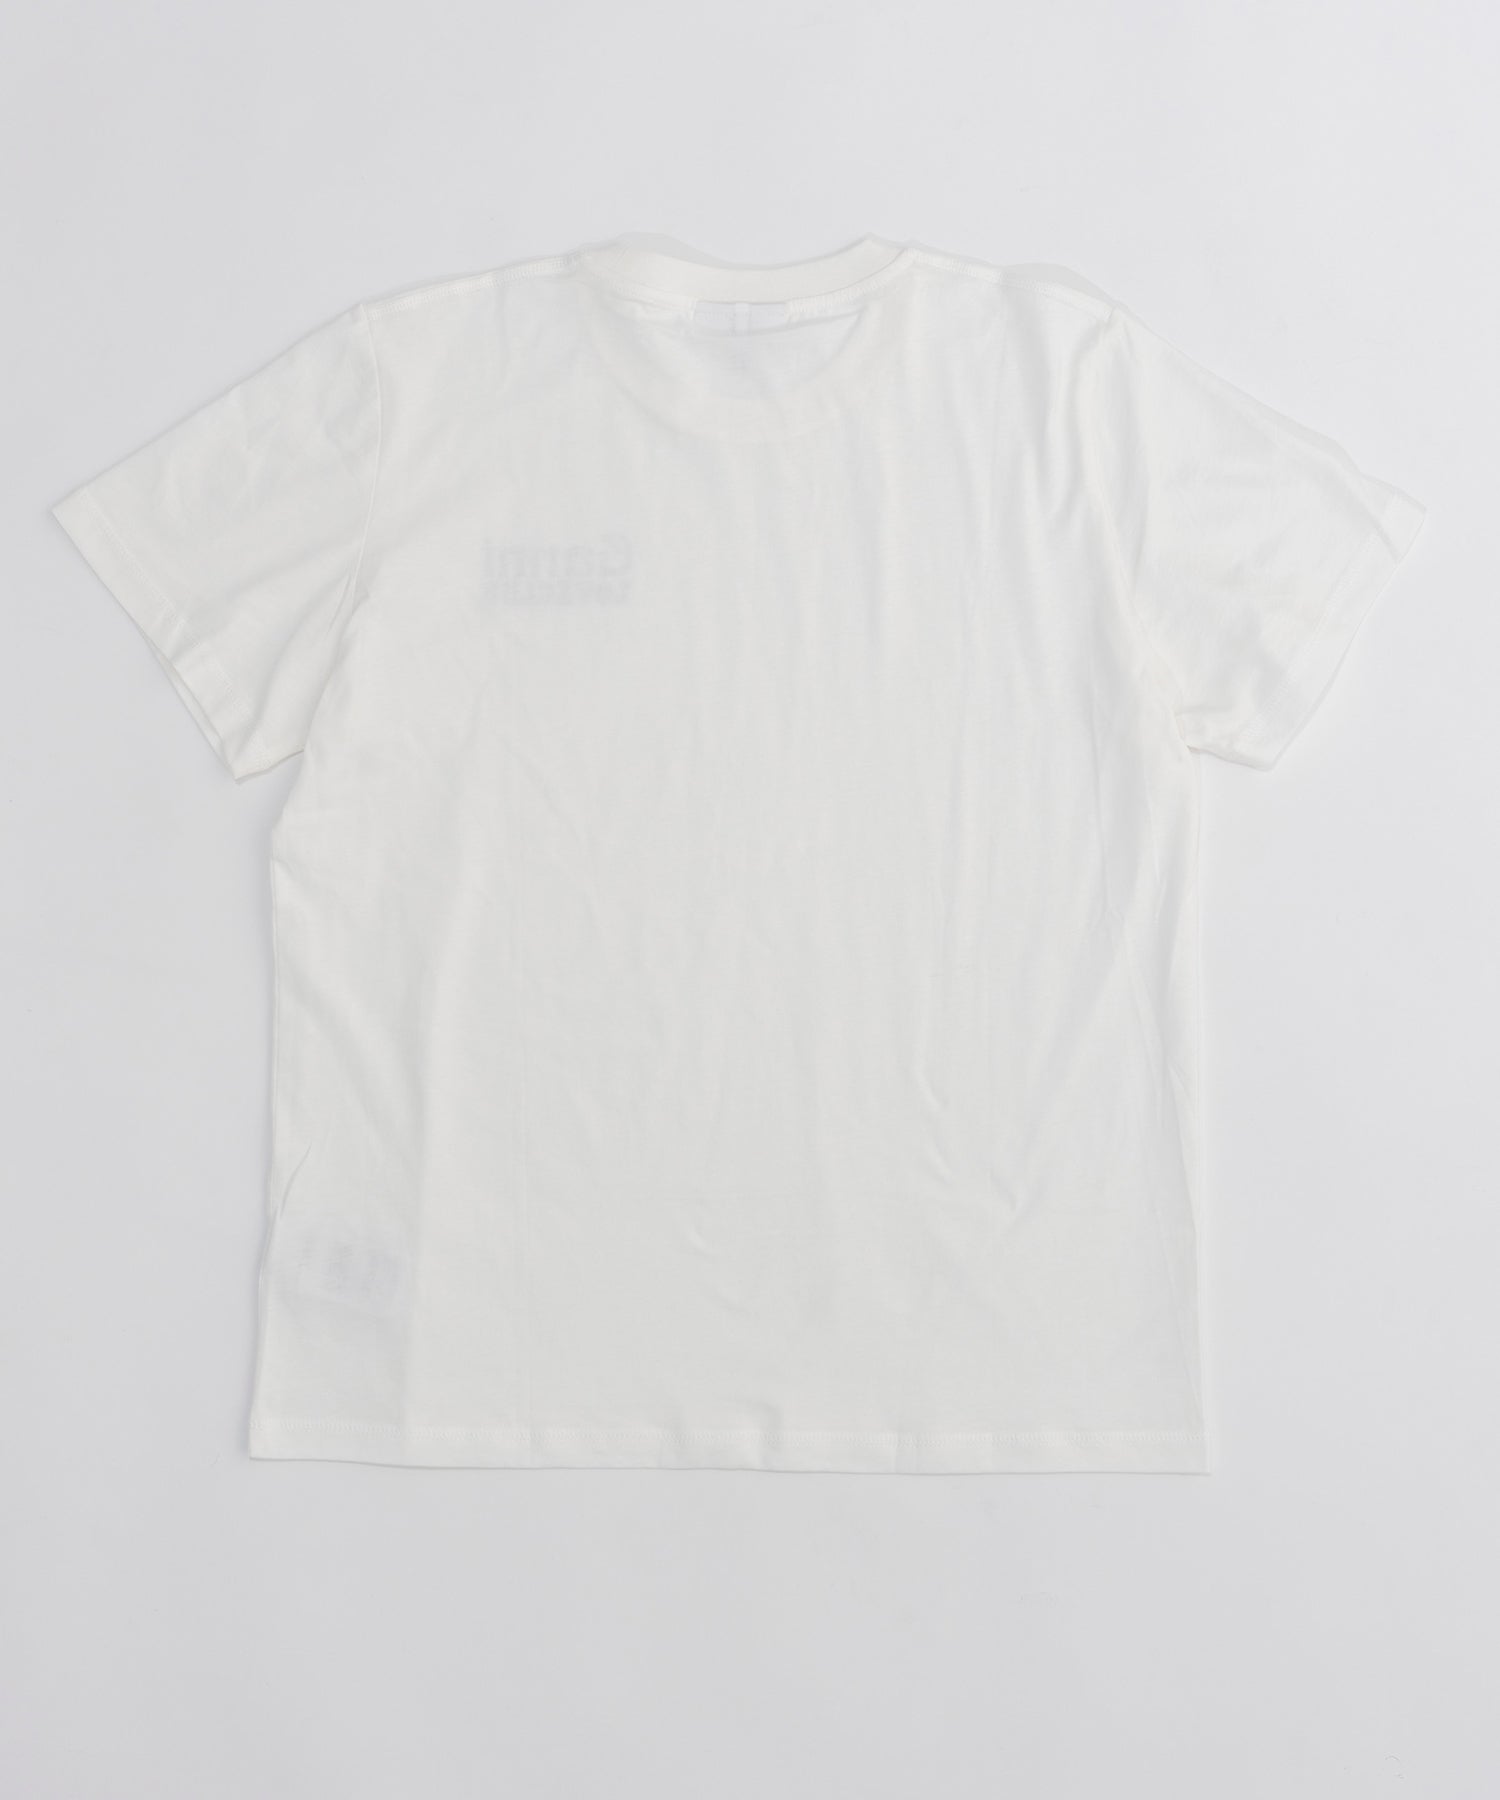 【GANNI】Thin Jersey Loveclub Relaxed T-shirt